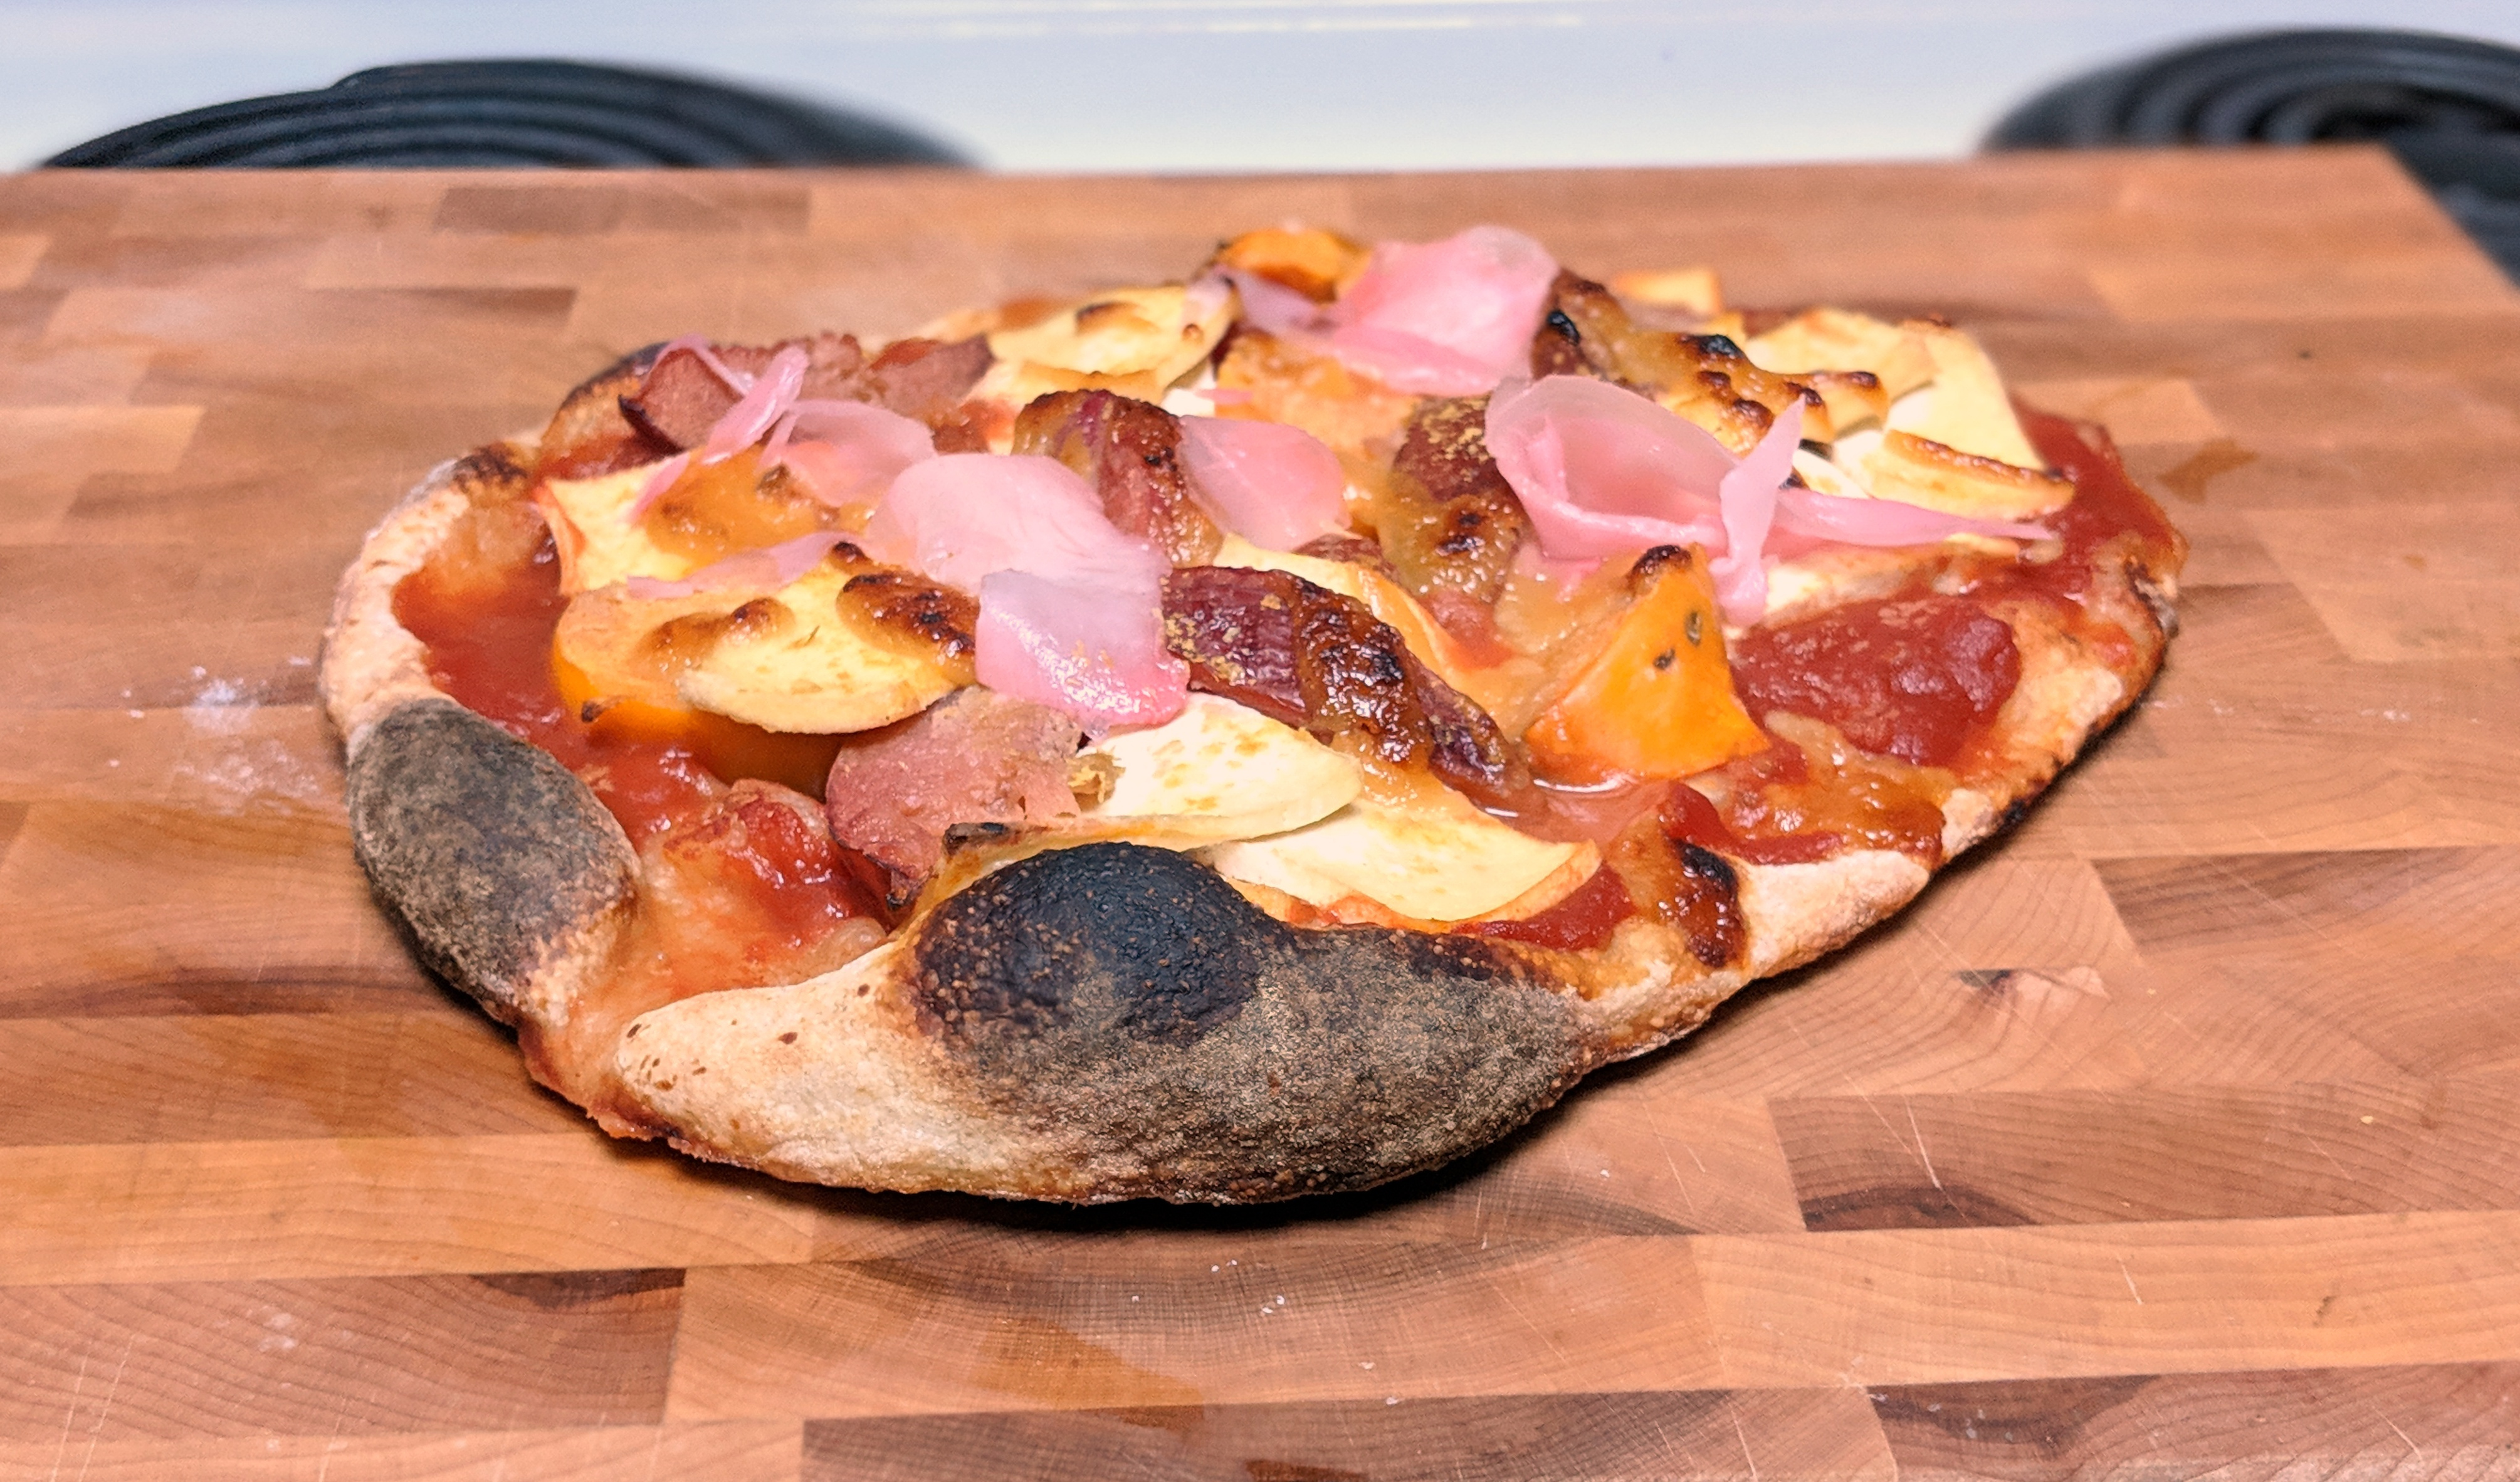 Pizza with lactofermented plums and fuyu